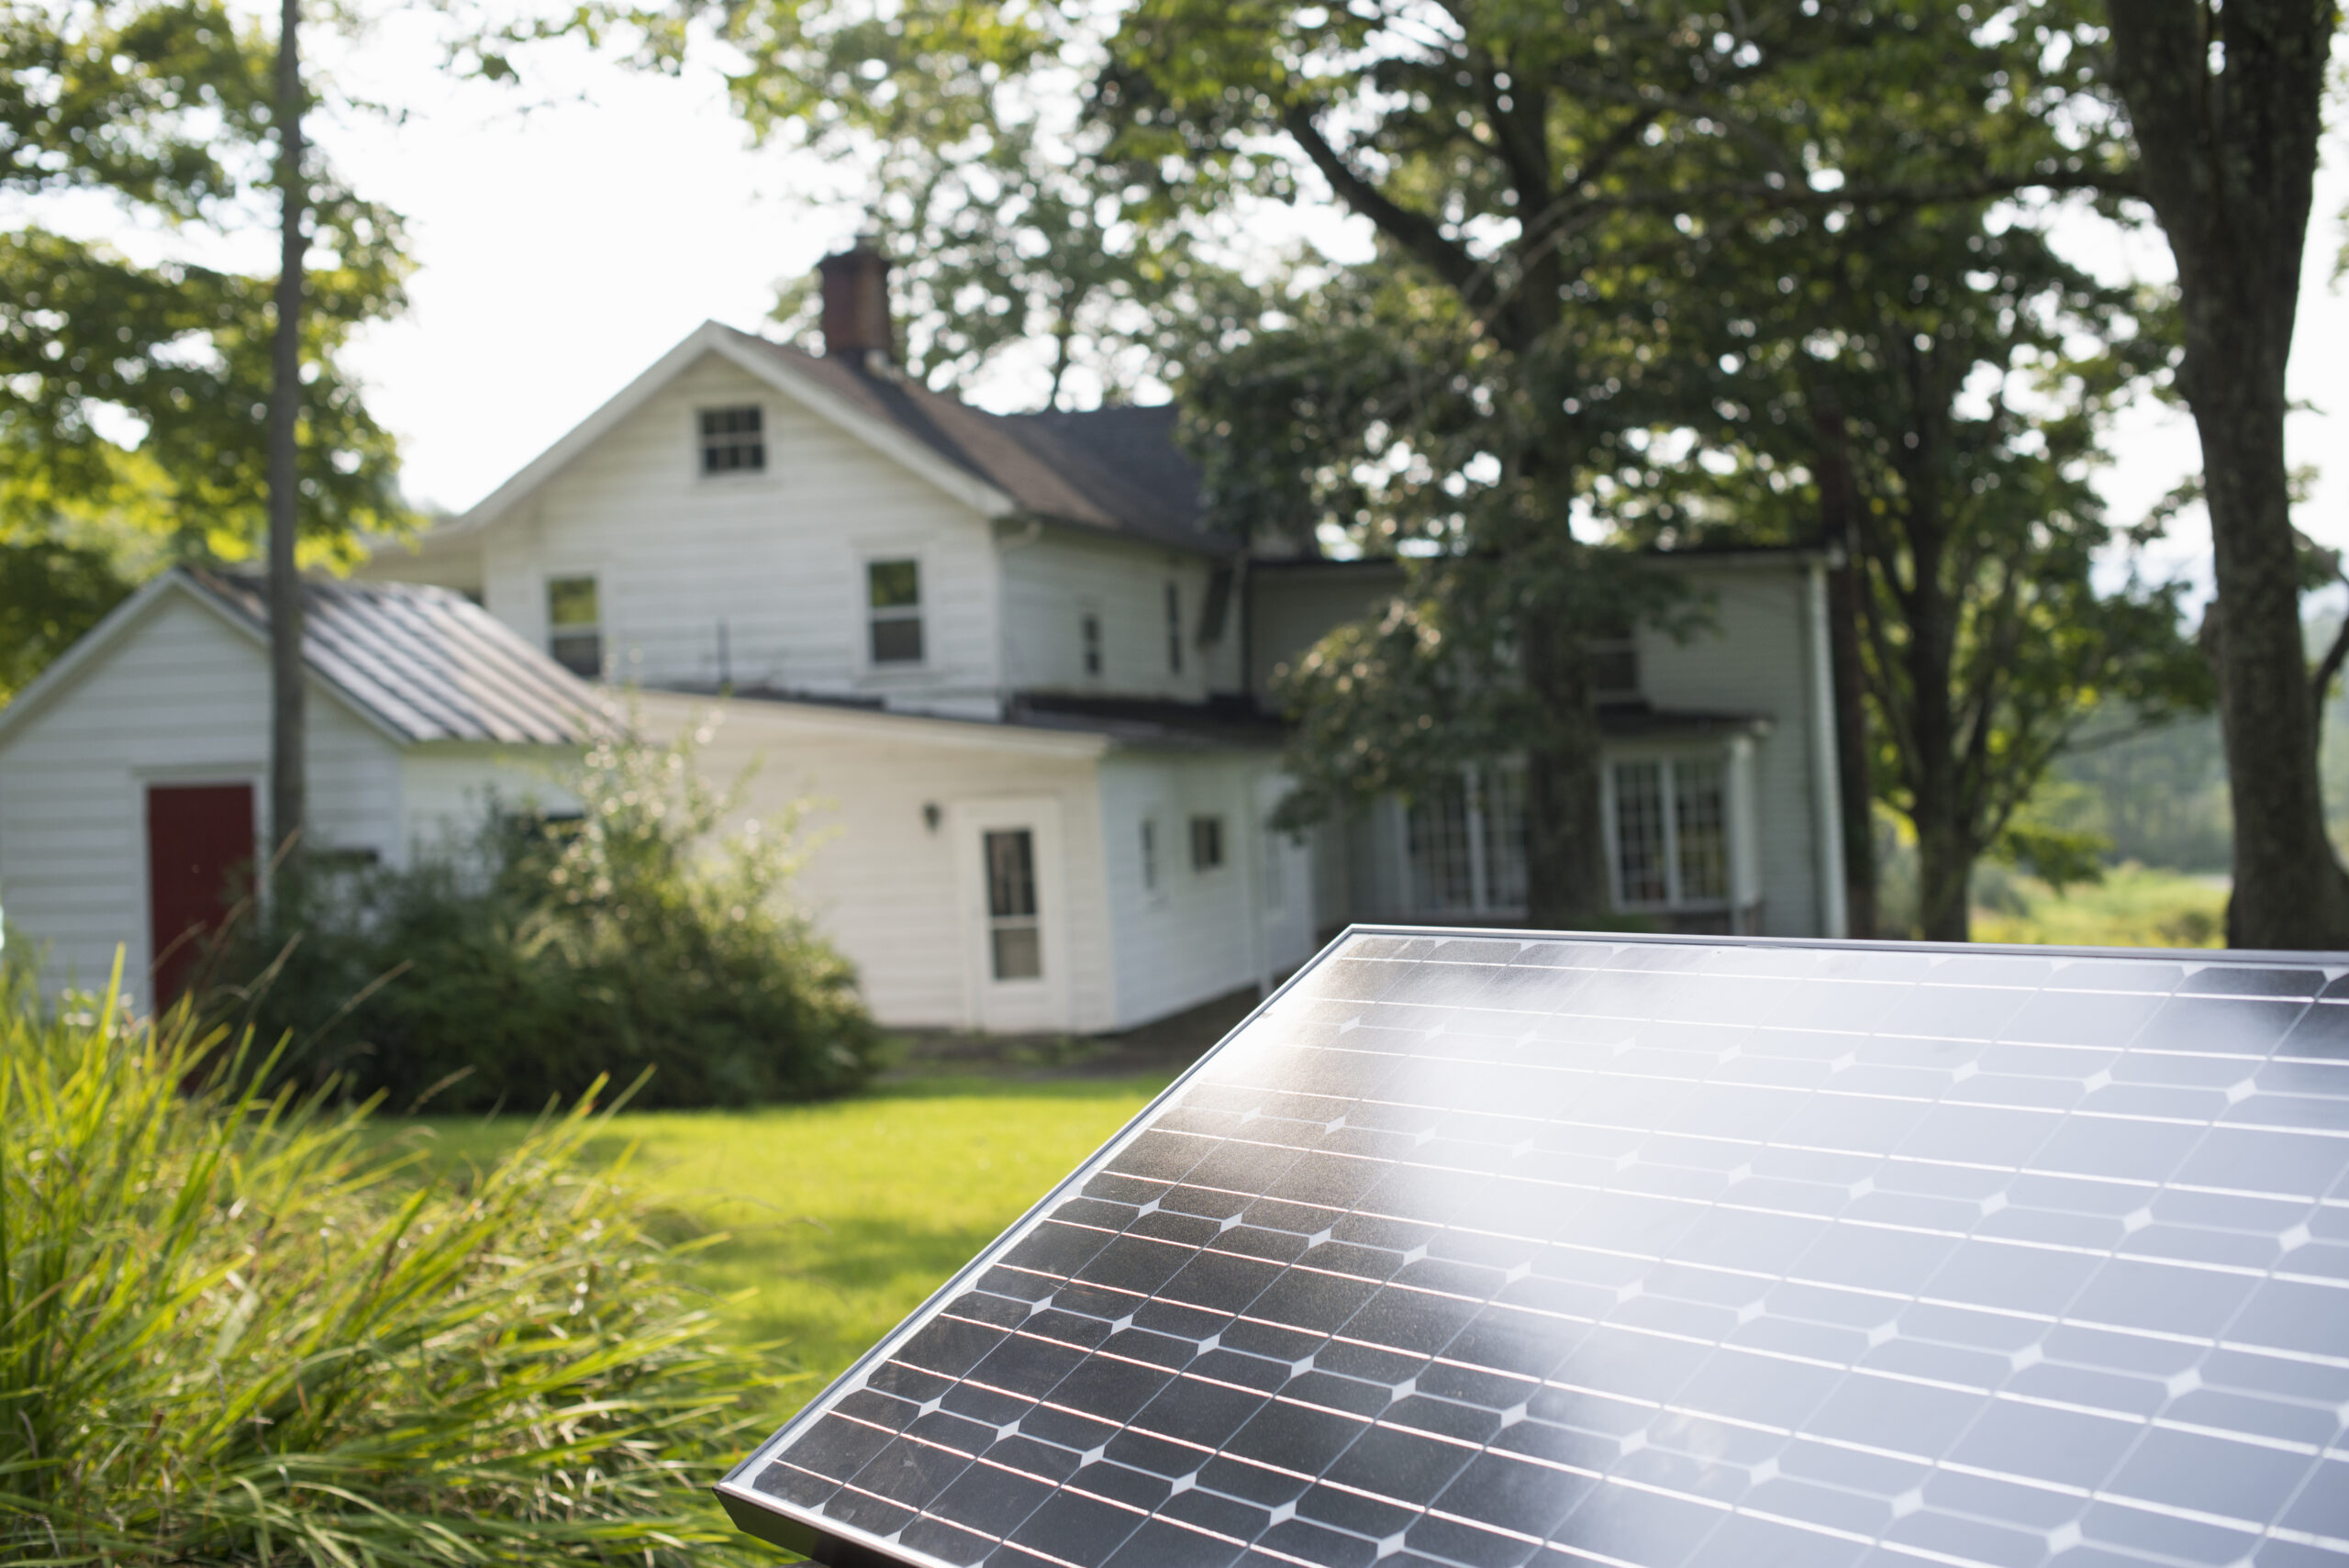 A solar panel is installed in the yard of a two-story white house surrounded by greenery and trees, taking advantage of Pennsylvania's government incentives to promote renewable energy.